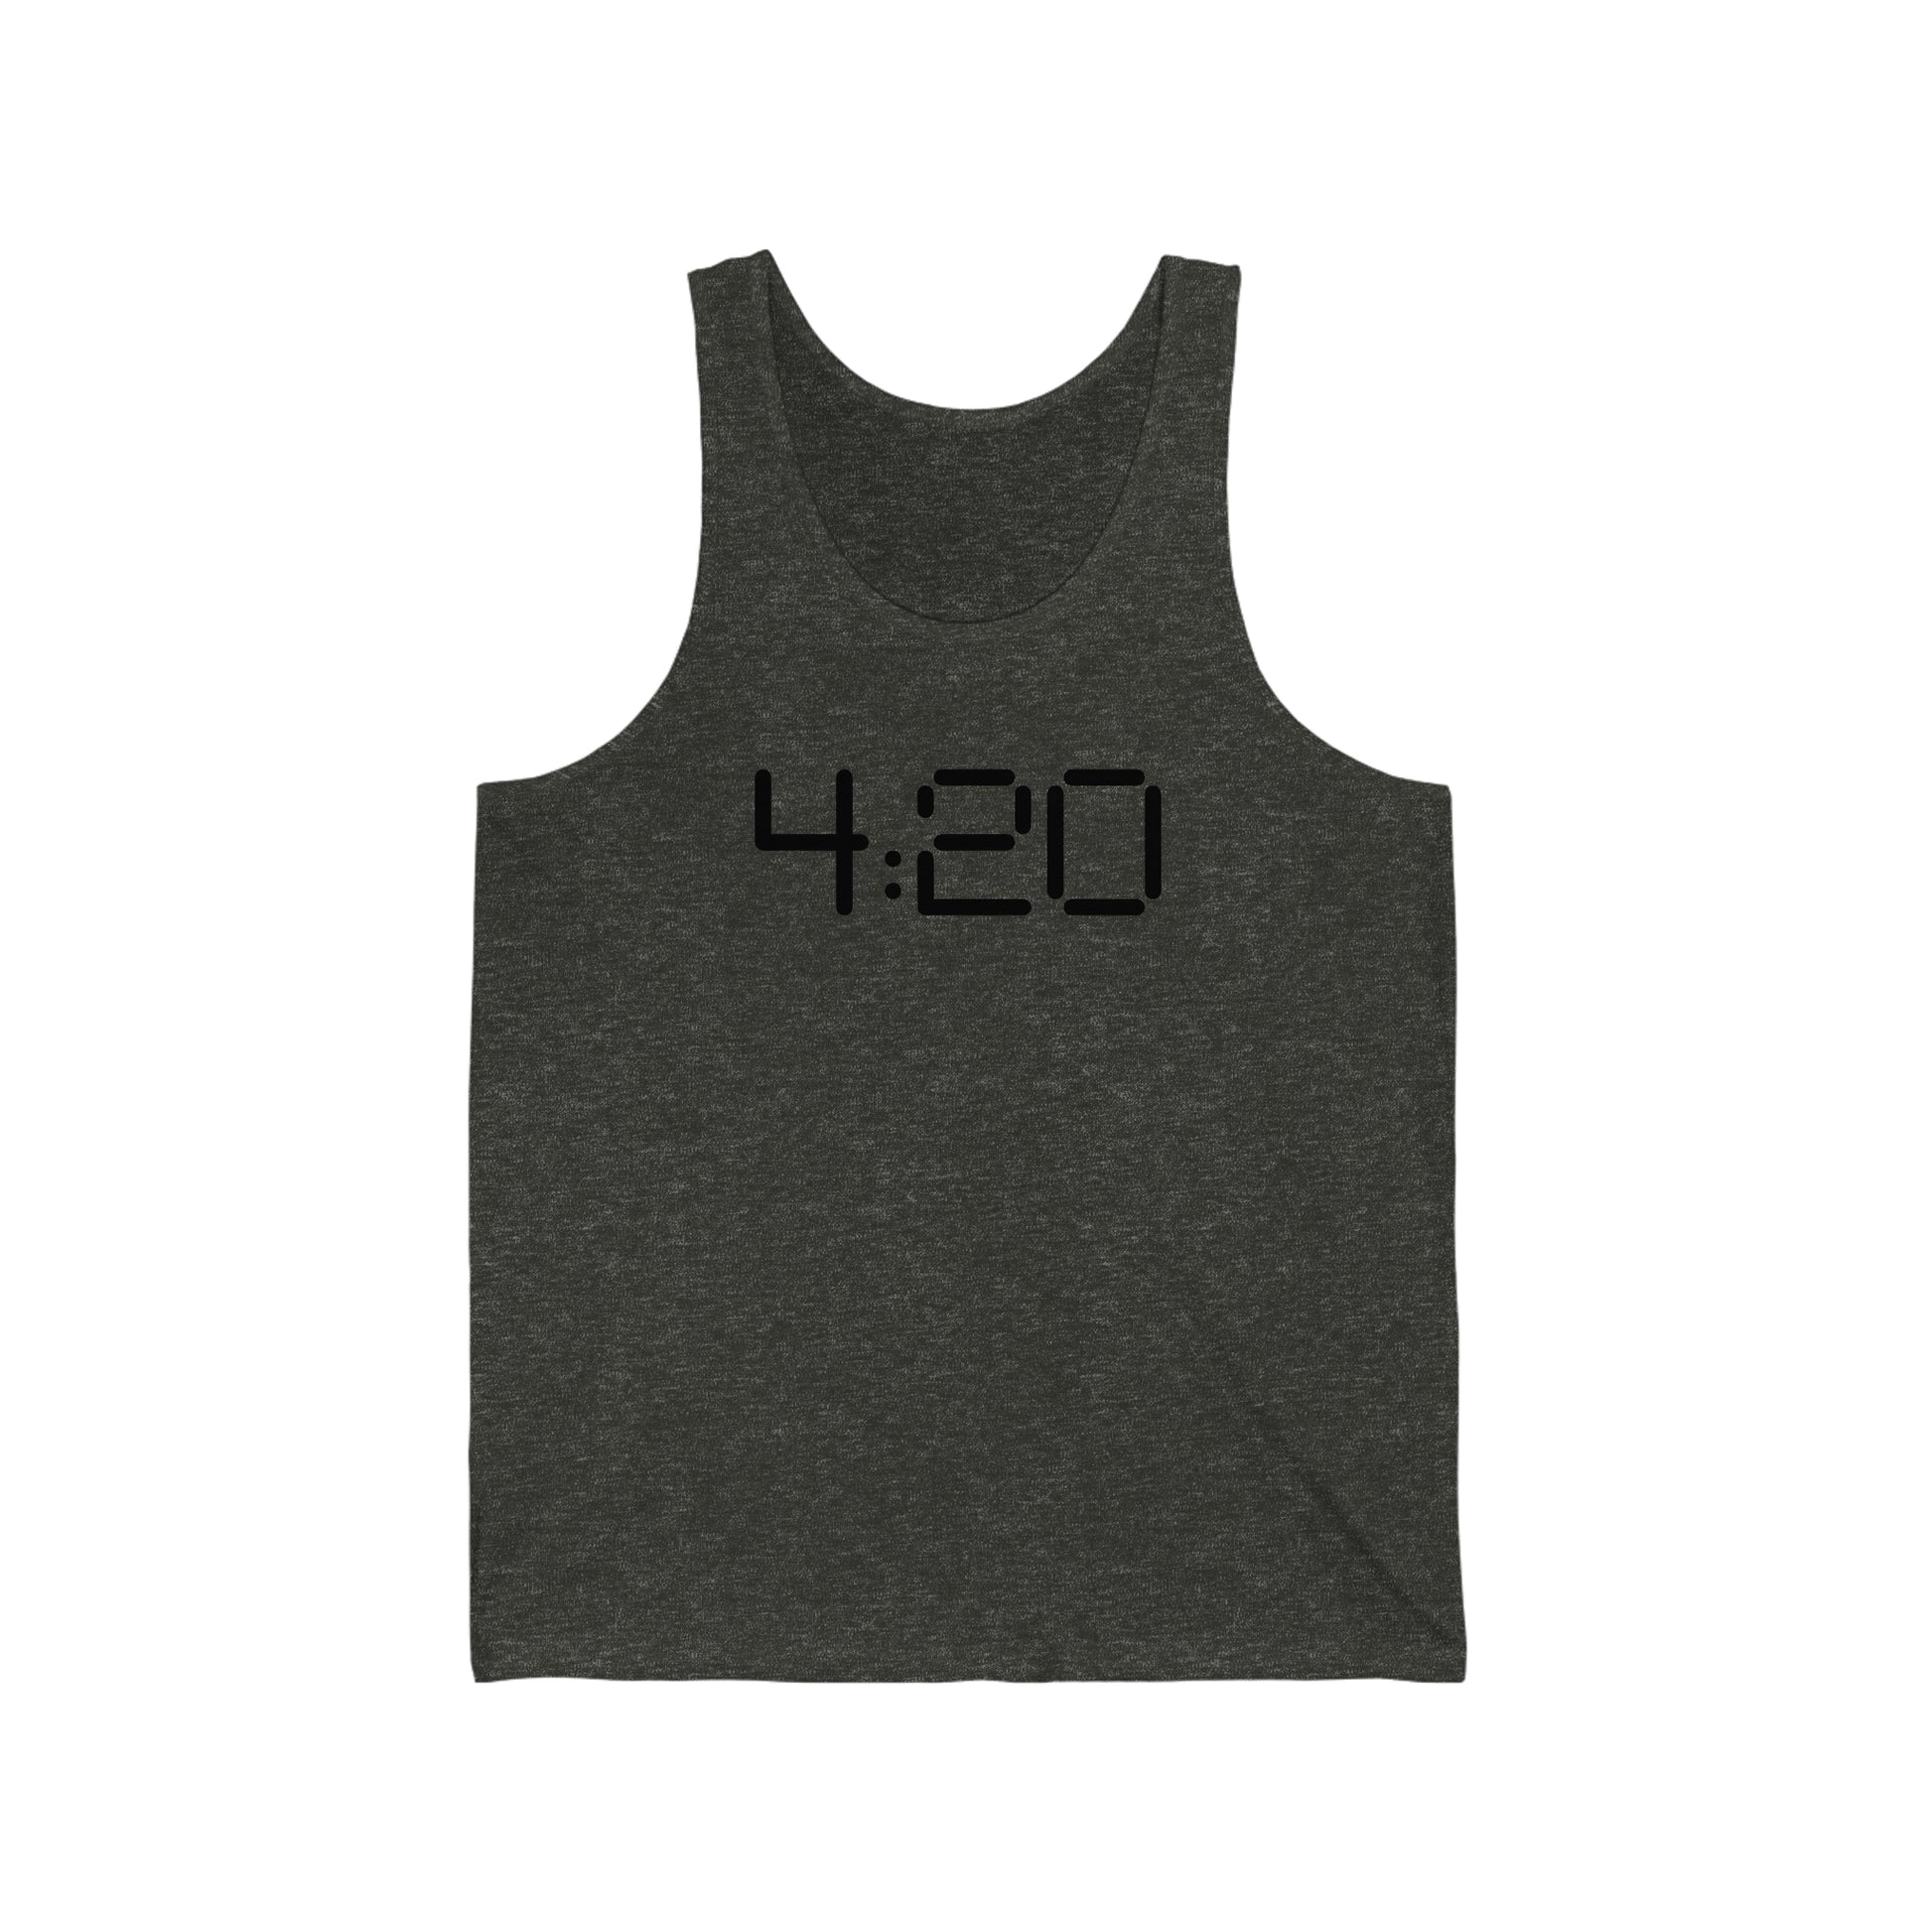 a gray tank top with the word 420 printed on it, belonging to the 420 shirts collection	